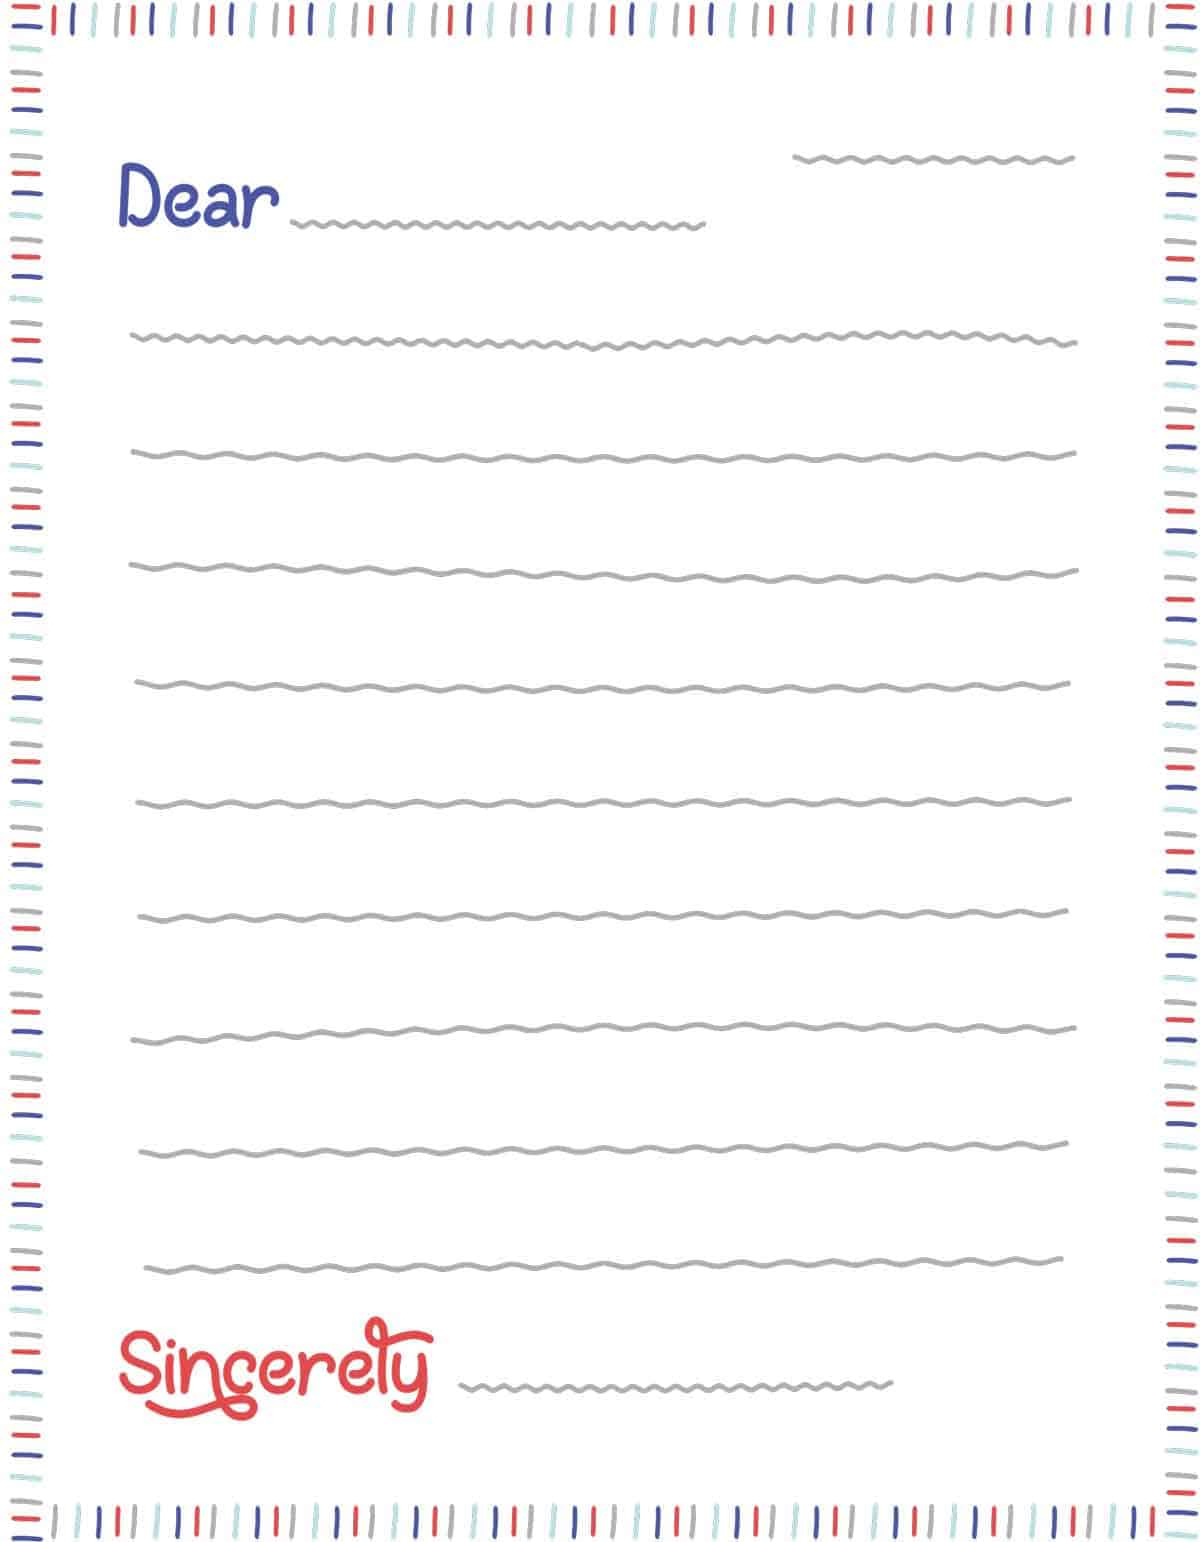 Free Letter Template for Kids: A Fun Activity  Skip To My Lou In Blank Letter Writing Template For Kids